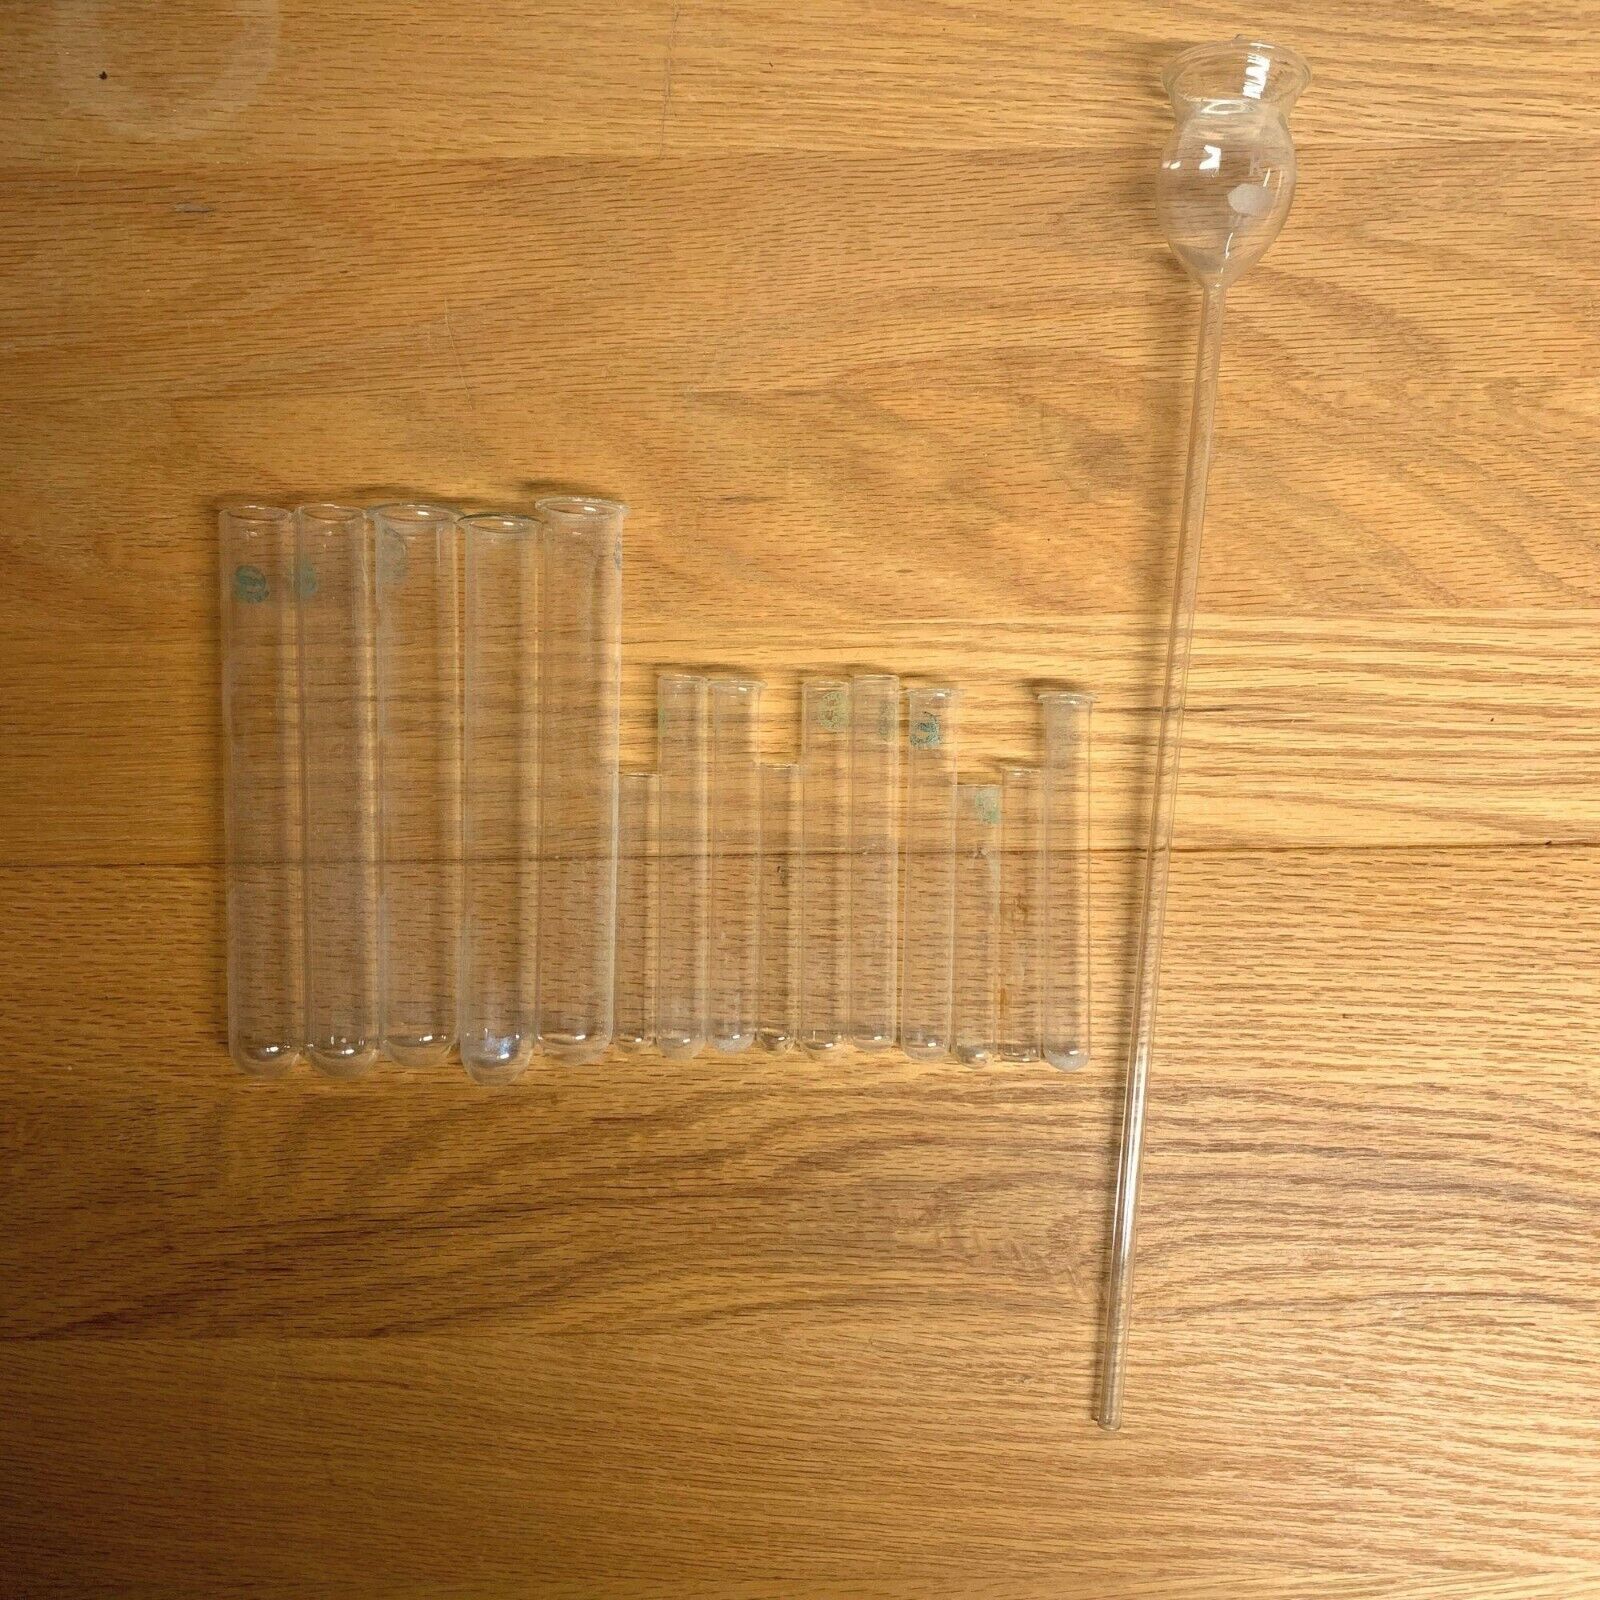 Vintage Pyrex Chemistry Glass Test Tubes Lot of 15 Pieces